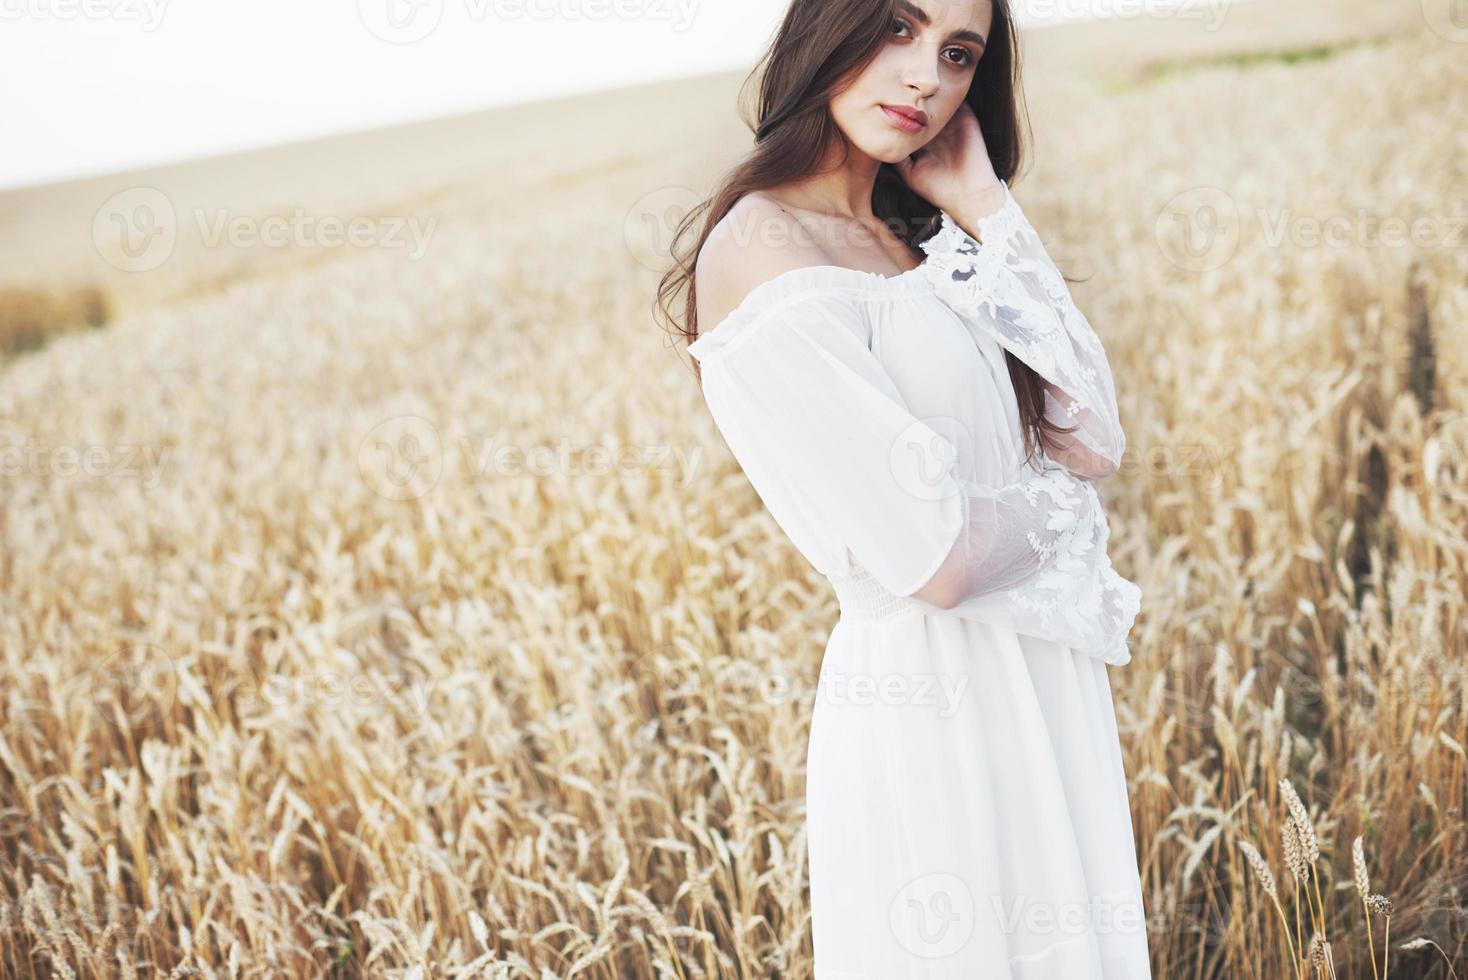 Young sensitive girl in white dress posing in a field of golden wheat photo